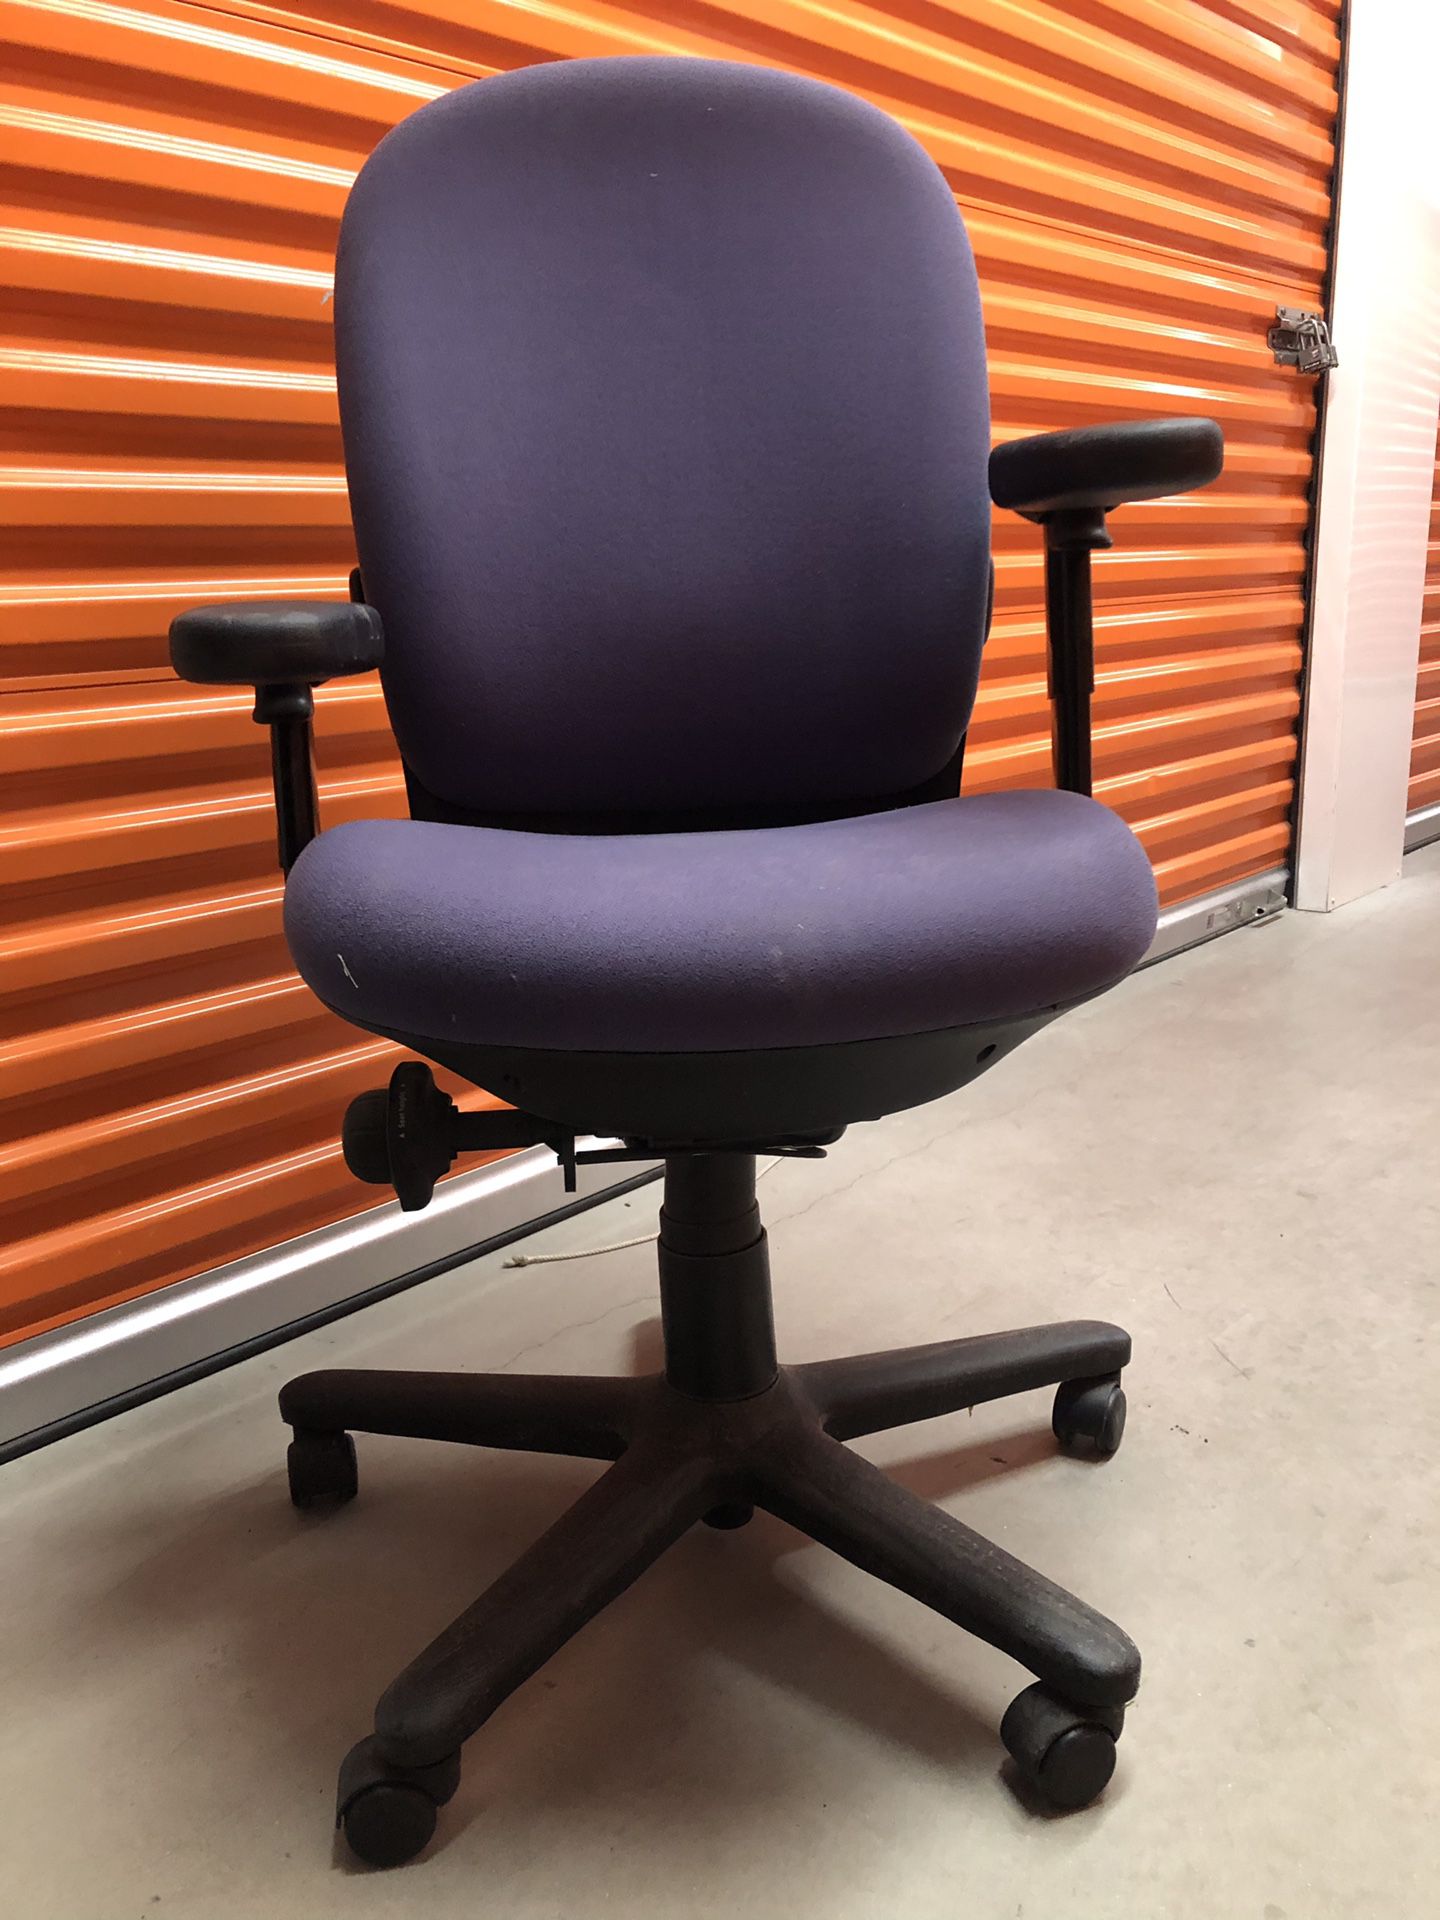 Great condition office chair